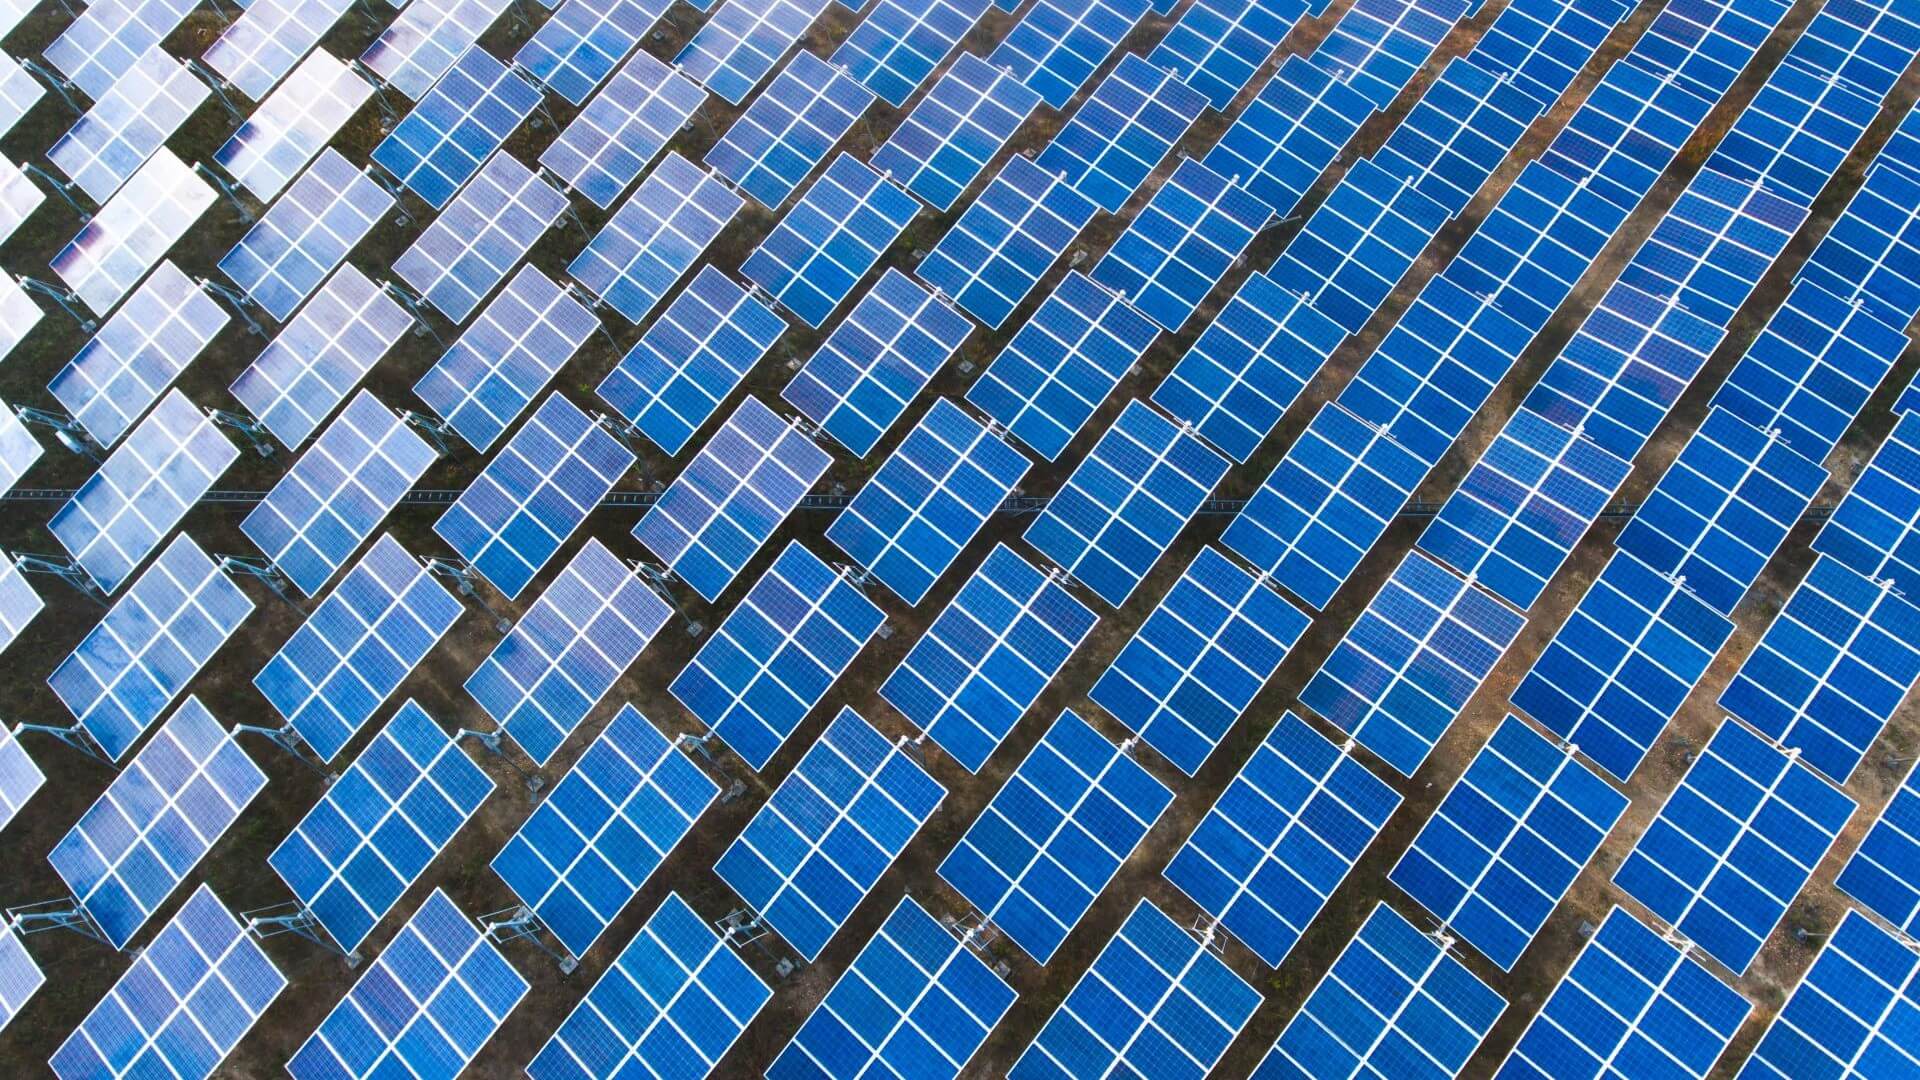 Aerial view of rows of solar panels in a field